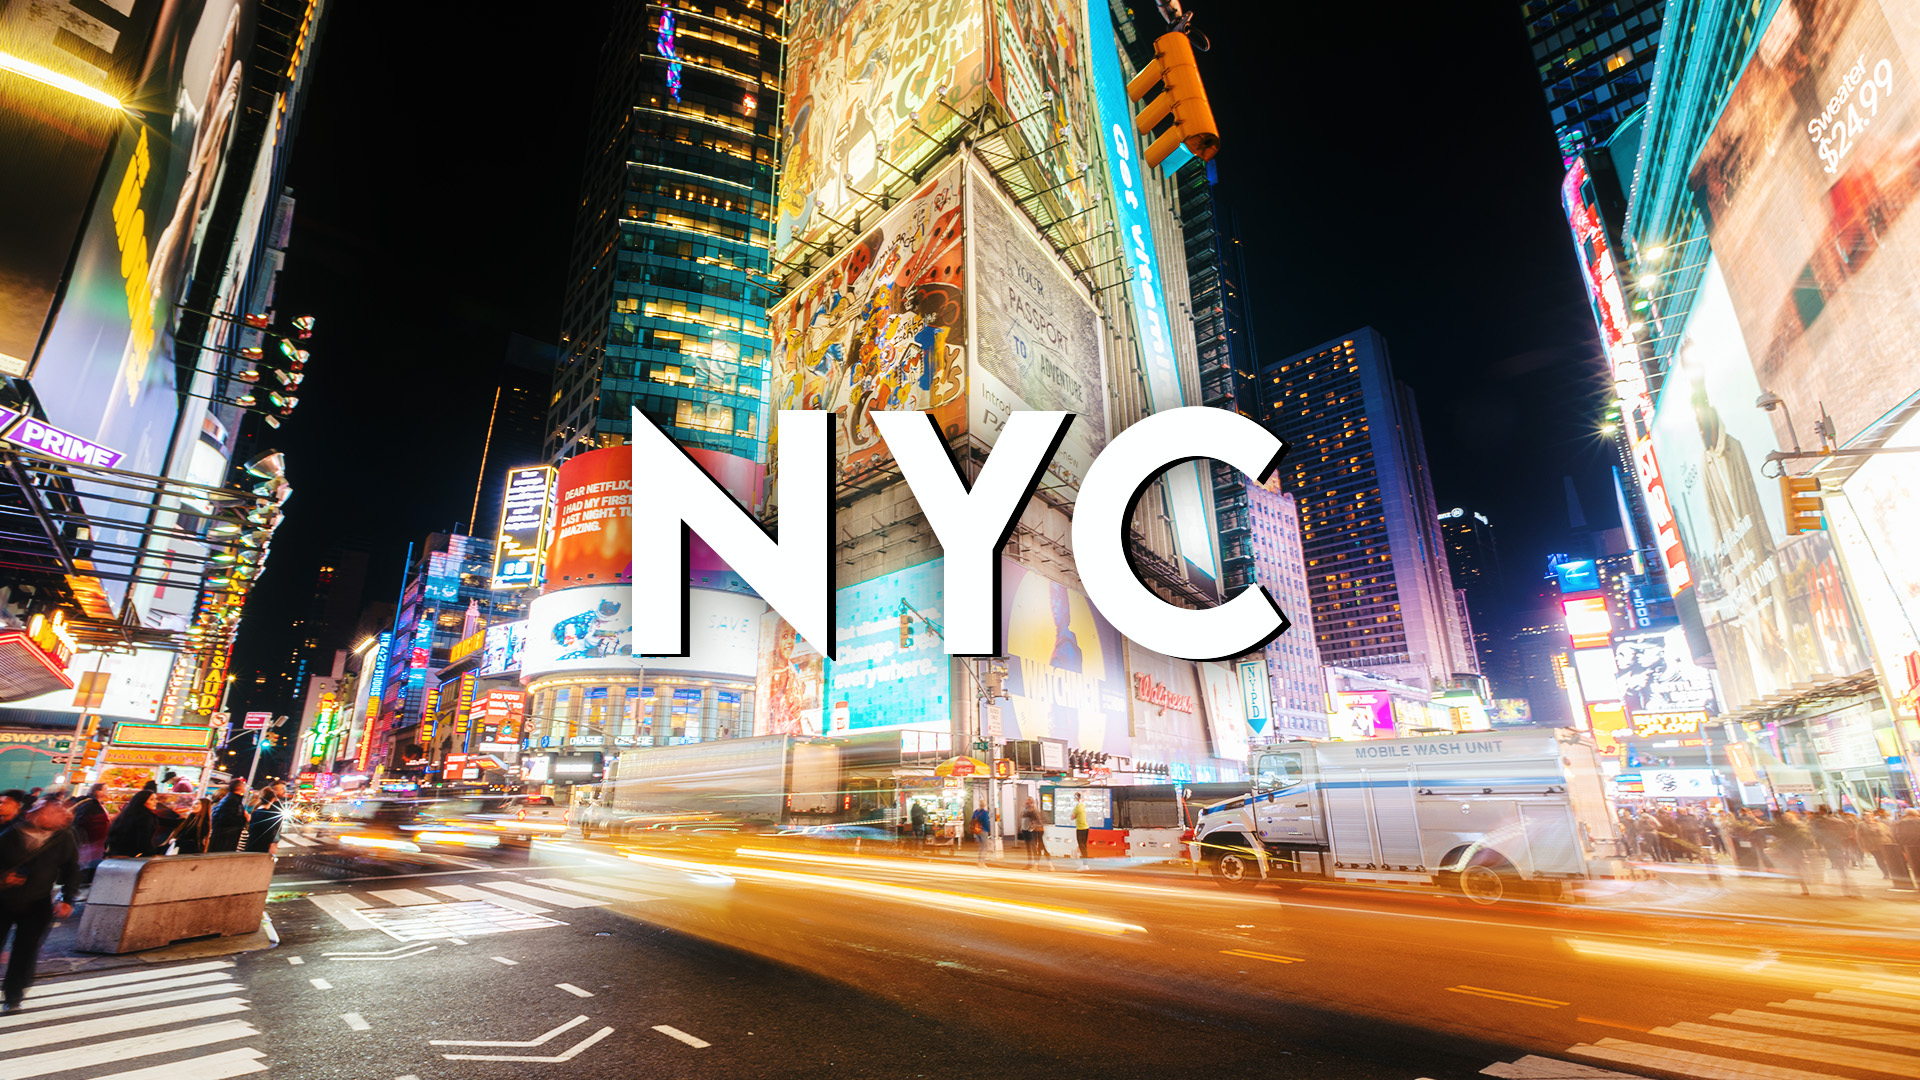 Read more about the article Day to Night: NYC Timelapse